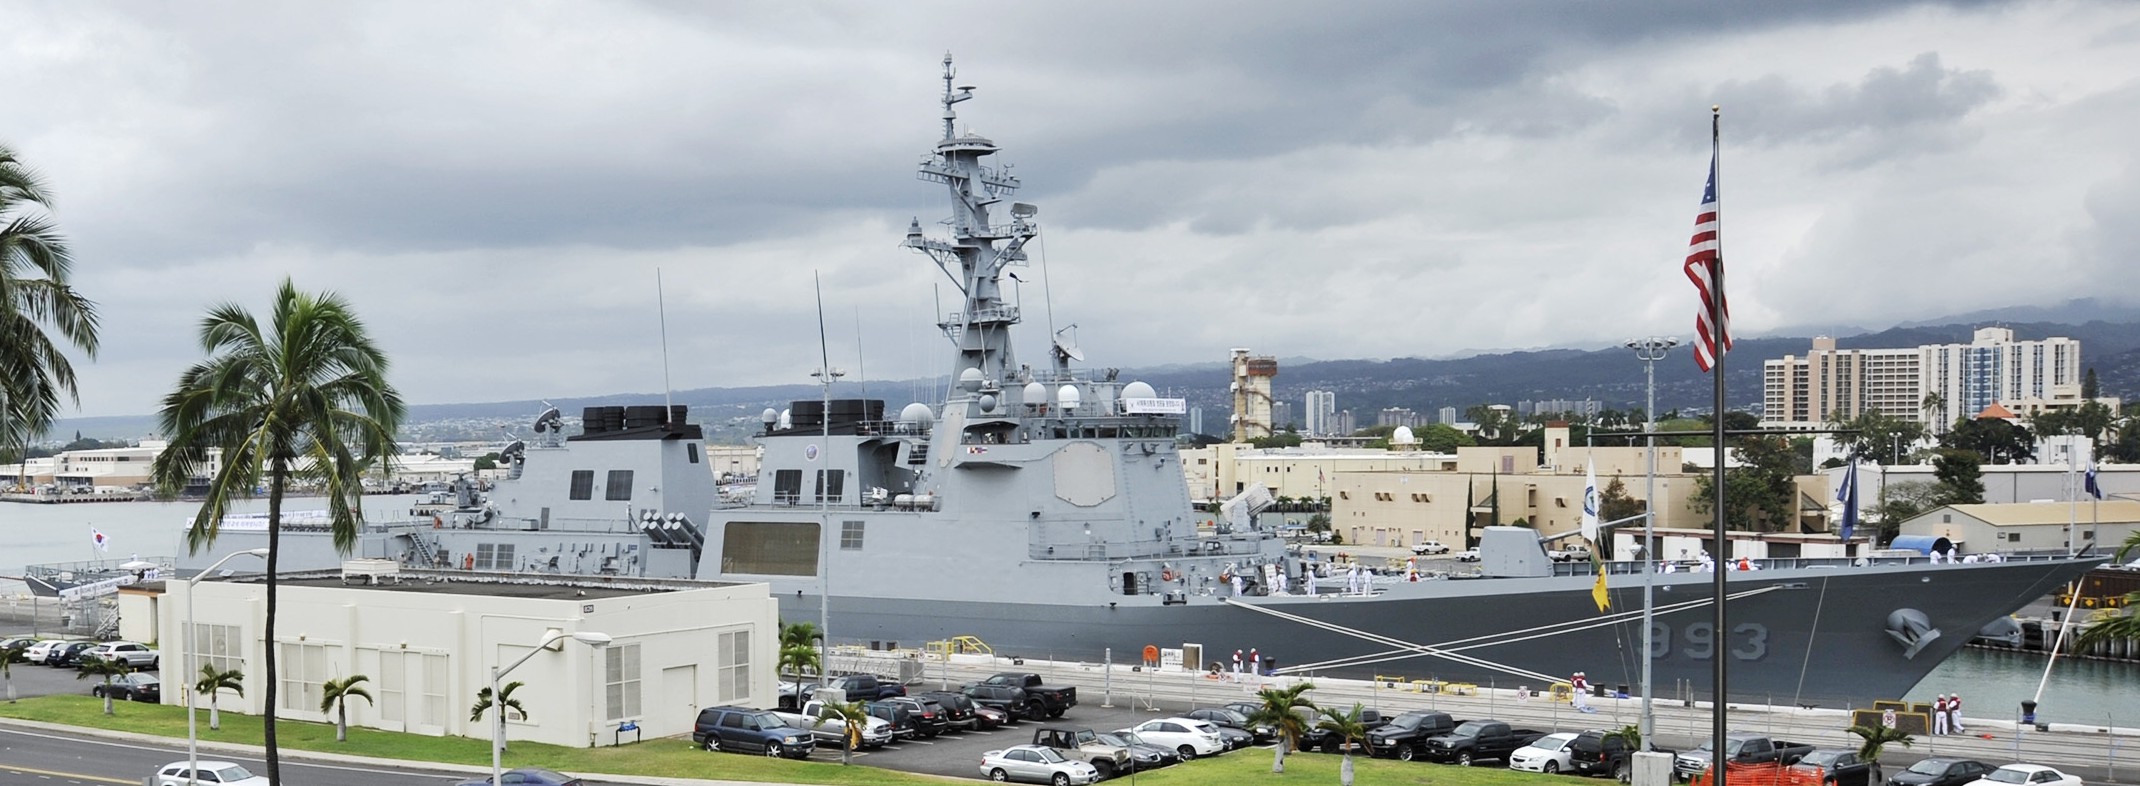 ddg-993 roks seoae ryu seong-ryong sejong the great class guided missile destroyer aegis republic of korea navy rokn 15 joint base pearl harbor hickam hawaii